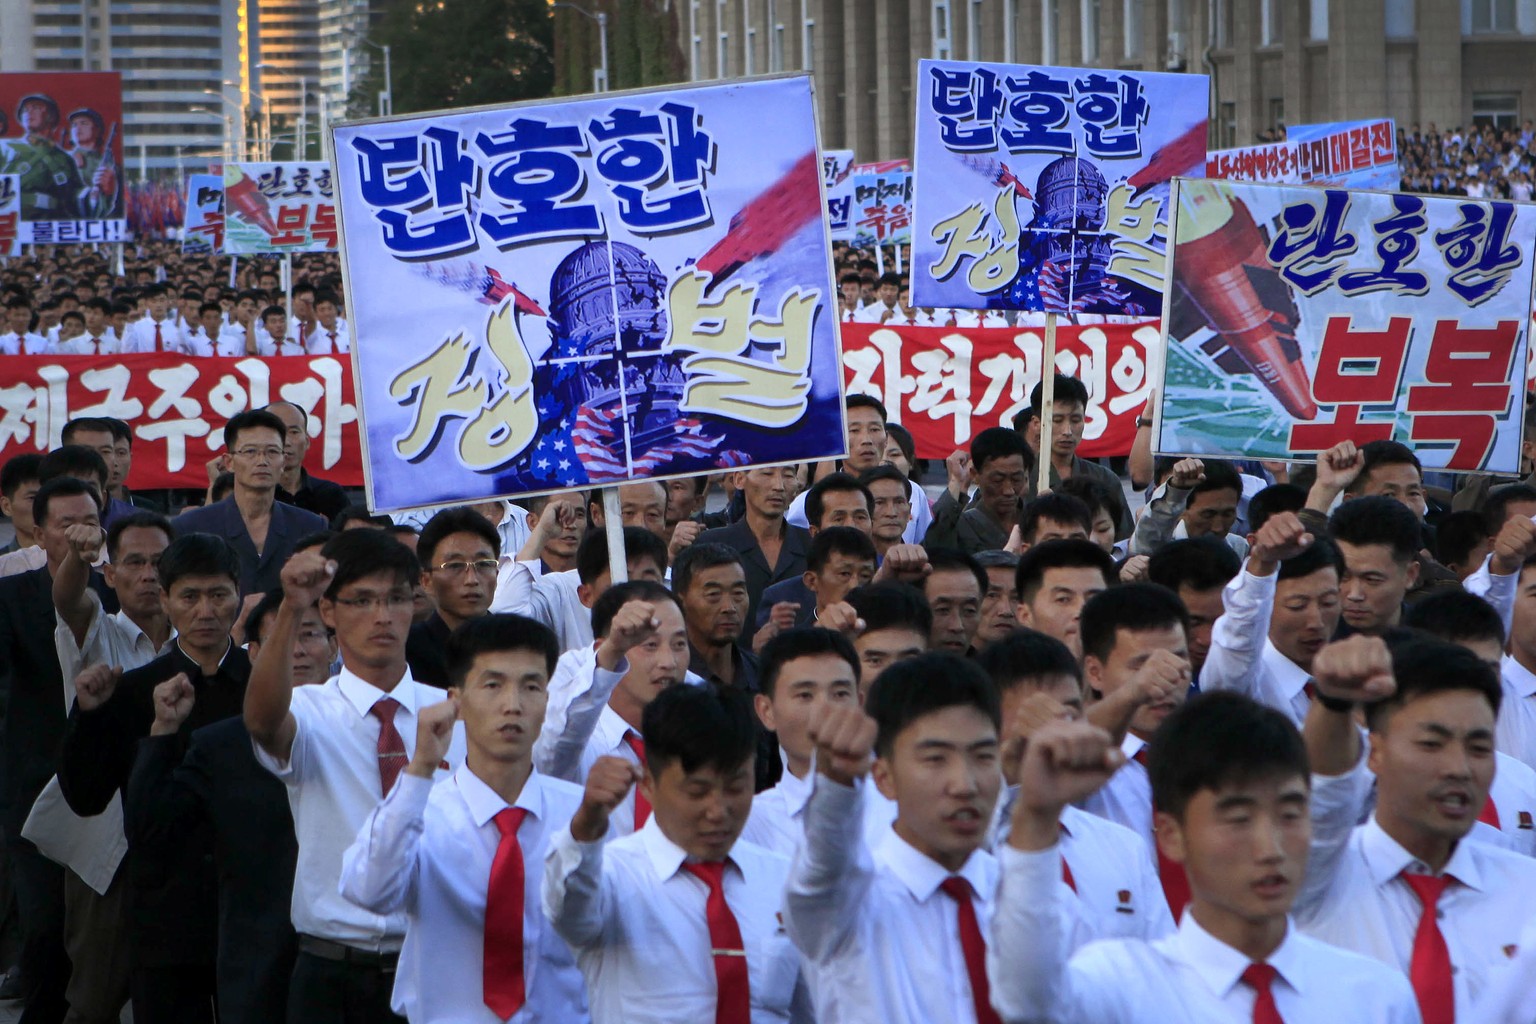 Hundreds of thousands of North Koreans gathered at Kim Il Sung Square to attend a mass rally against America on Saturday Sept. 23, 2017, in Pyongyang, North Korea, a day after the country&#039;s leade ...